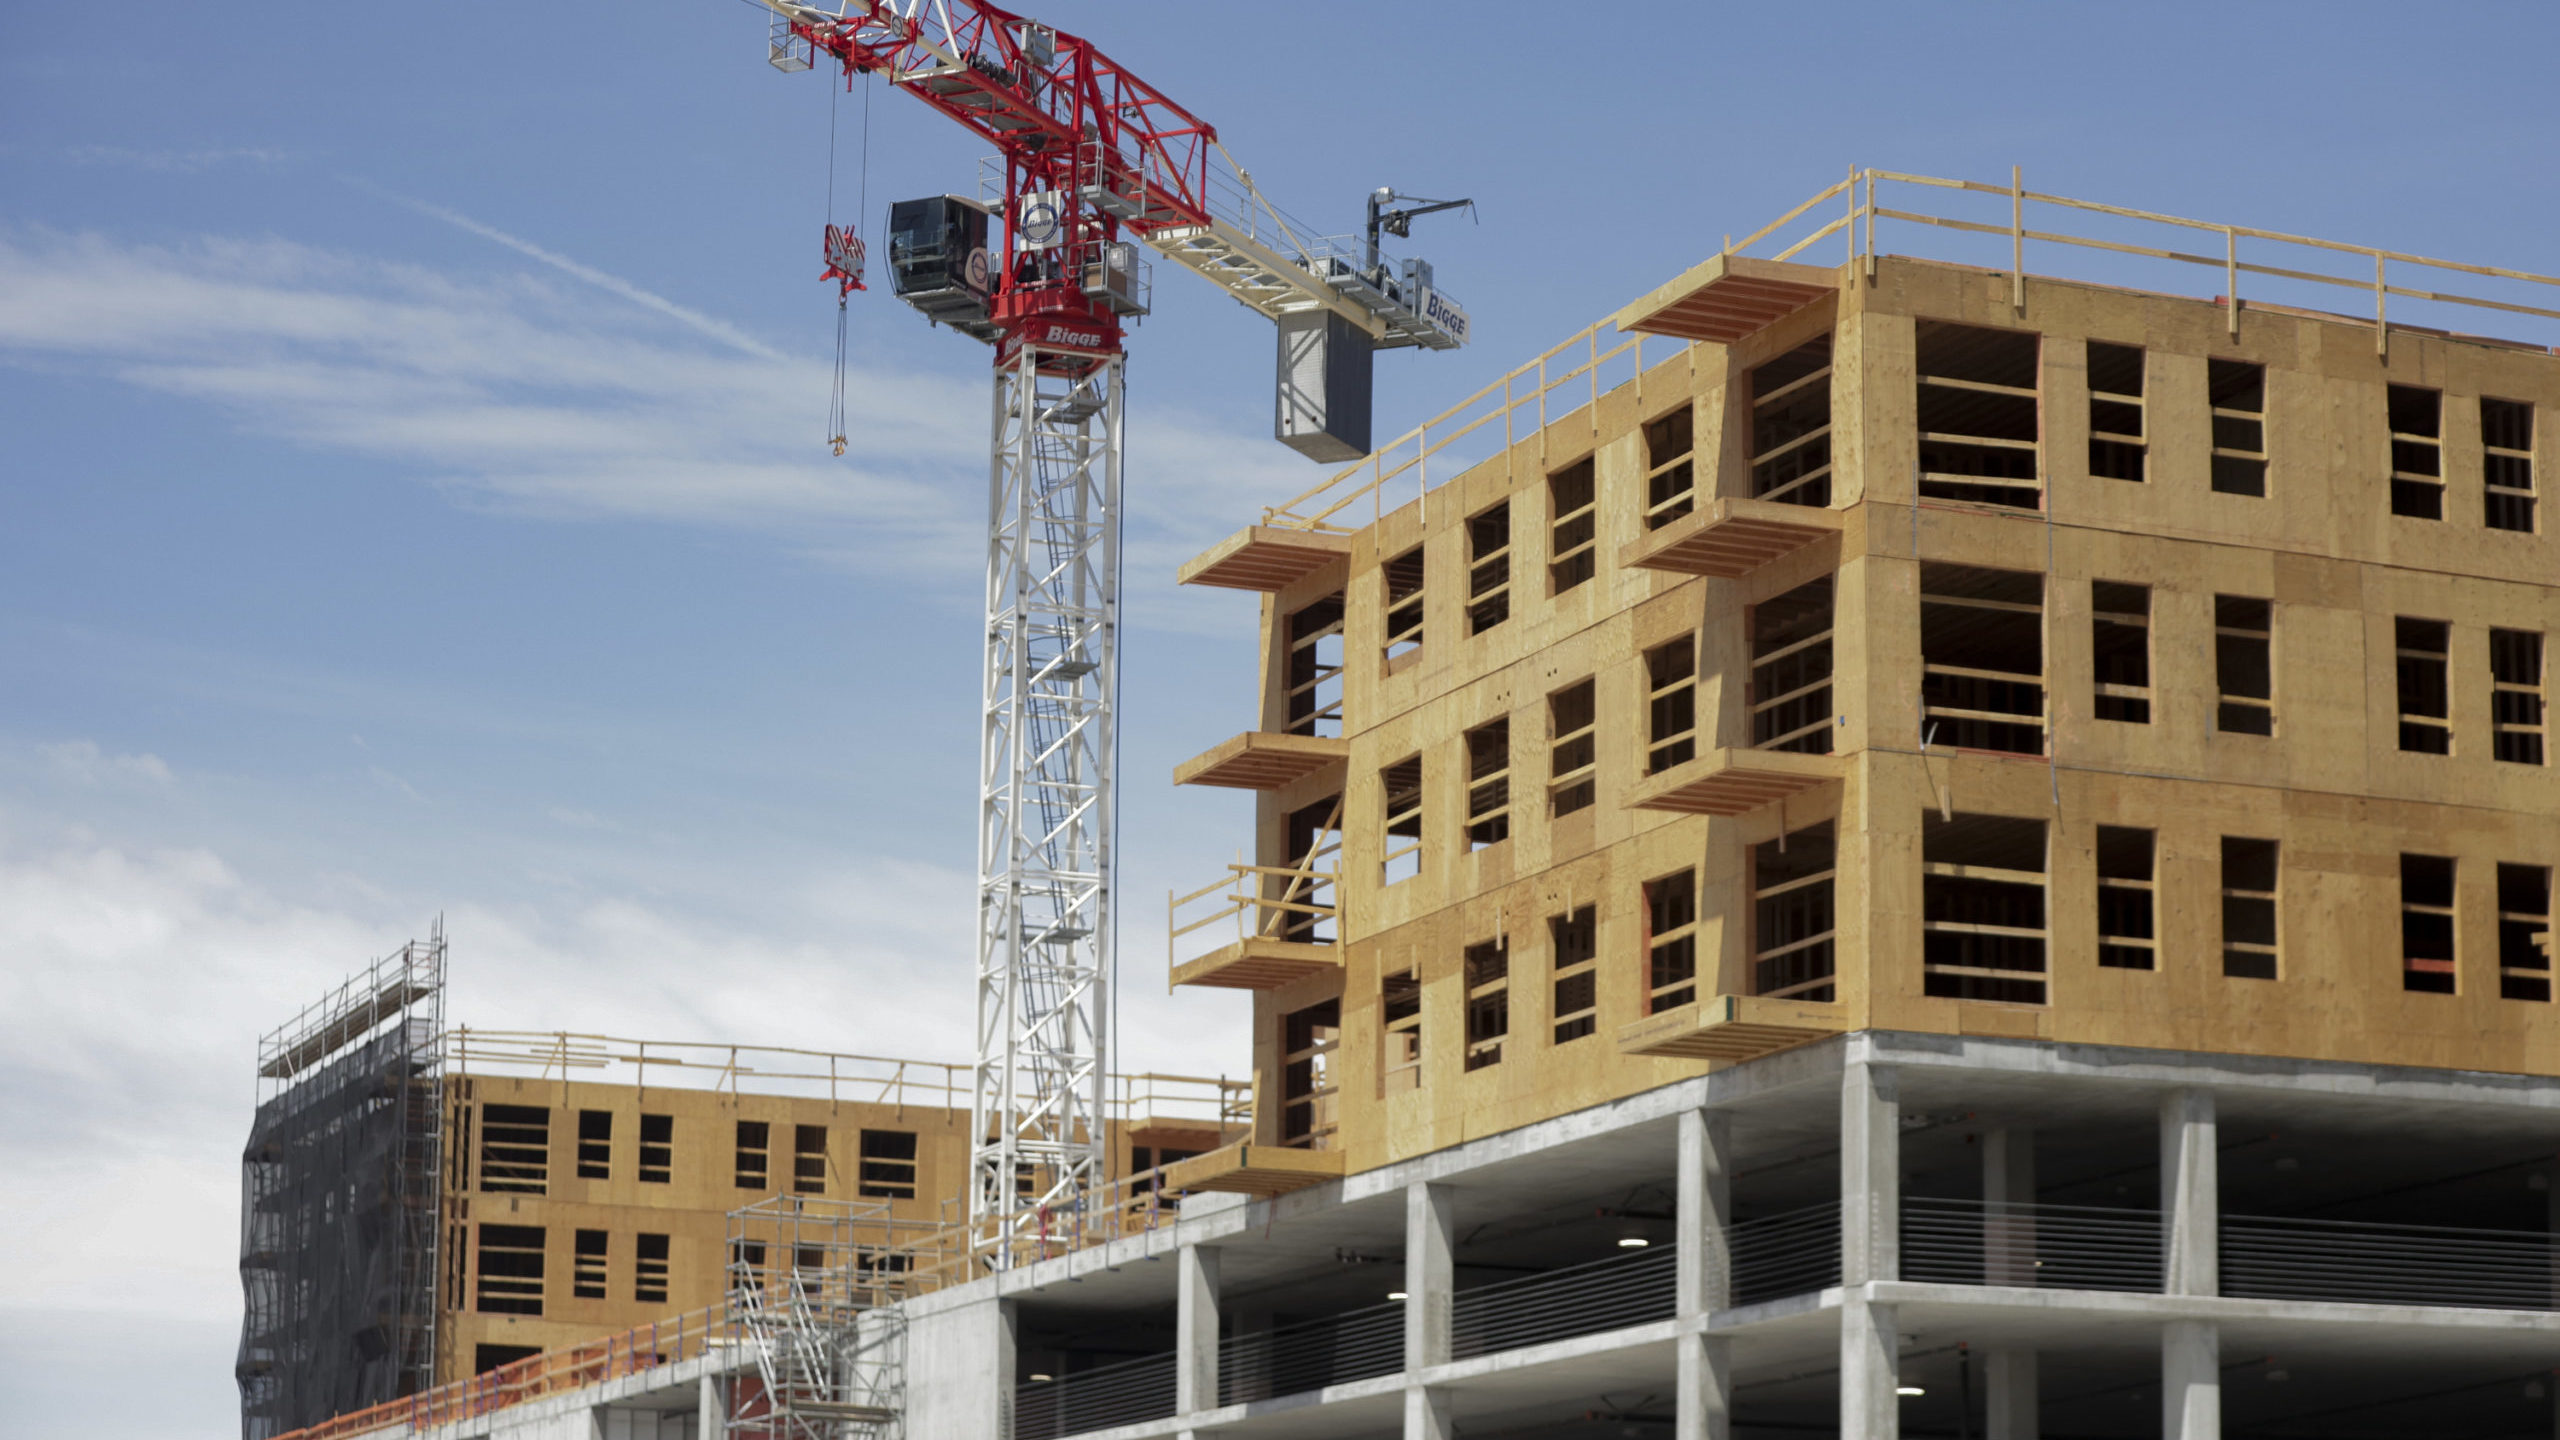 An apartment building under construction, the UHPF helps provide affordable housing in Utah...